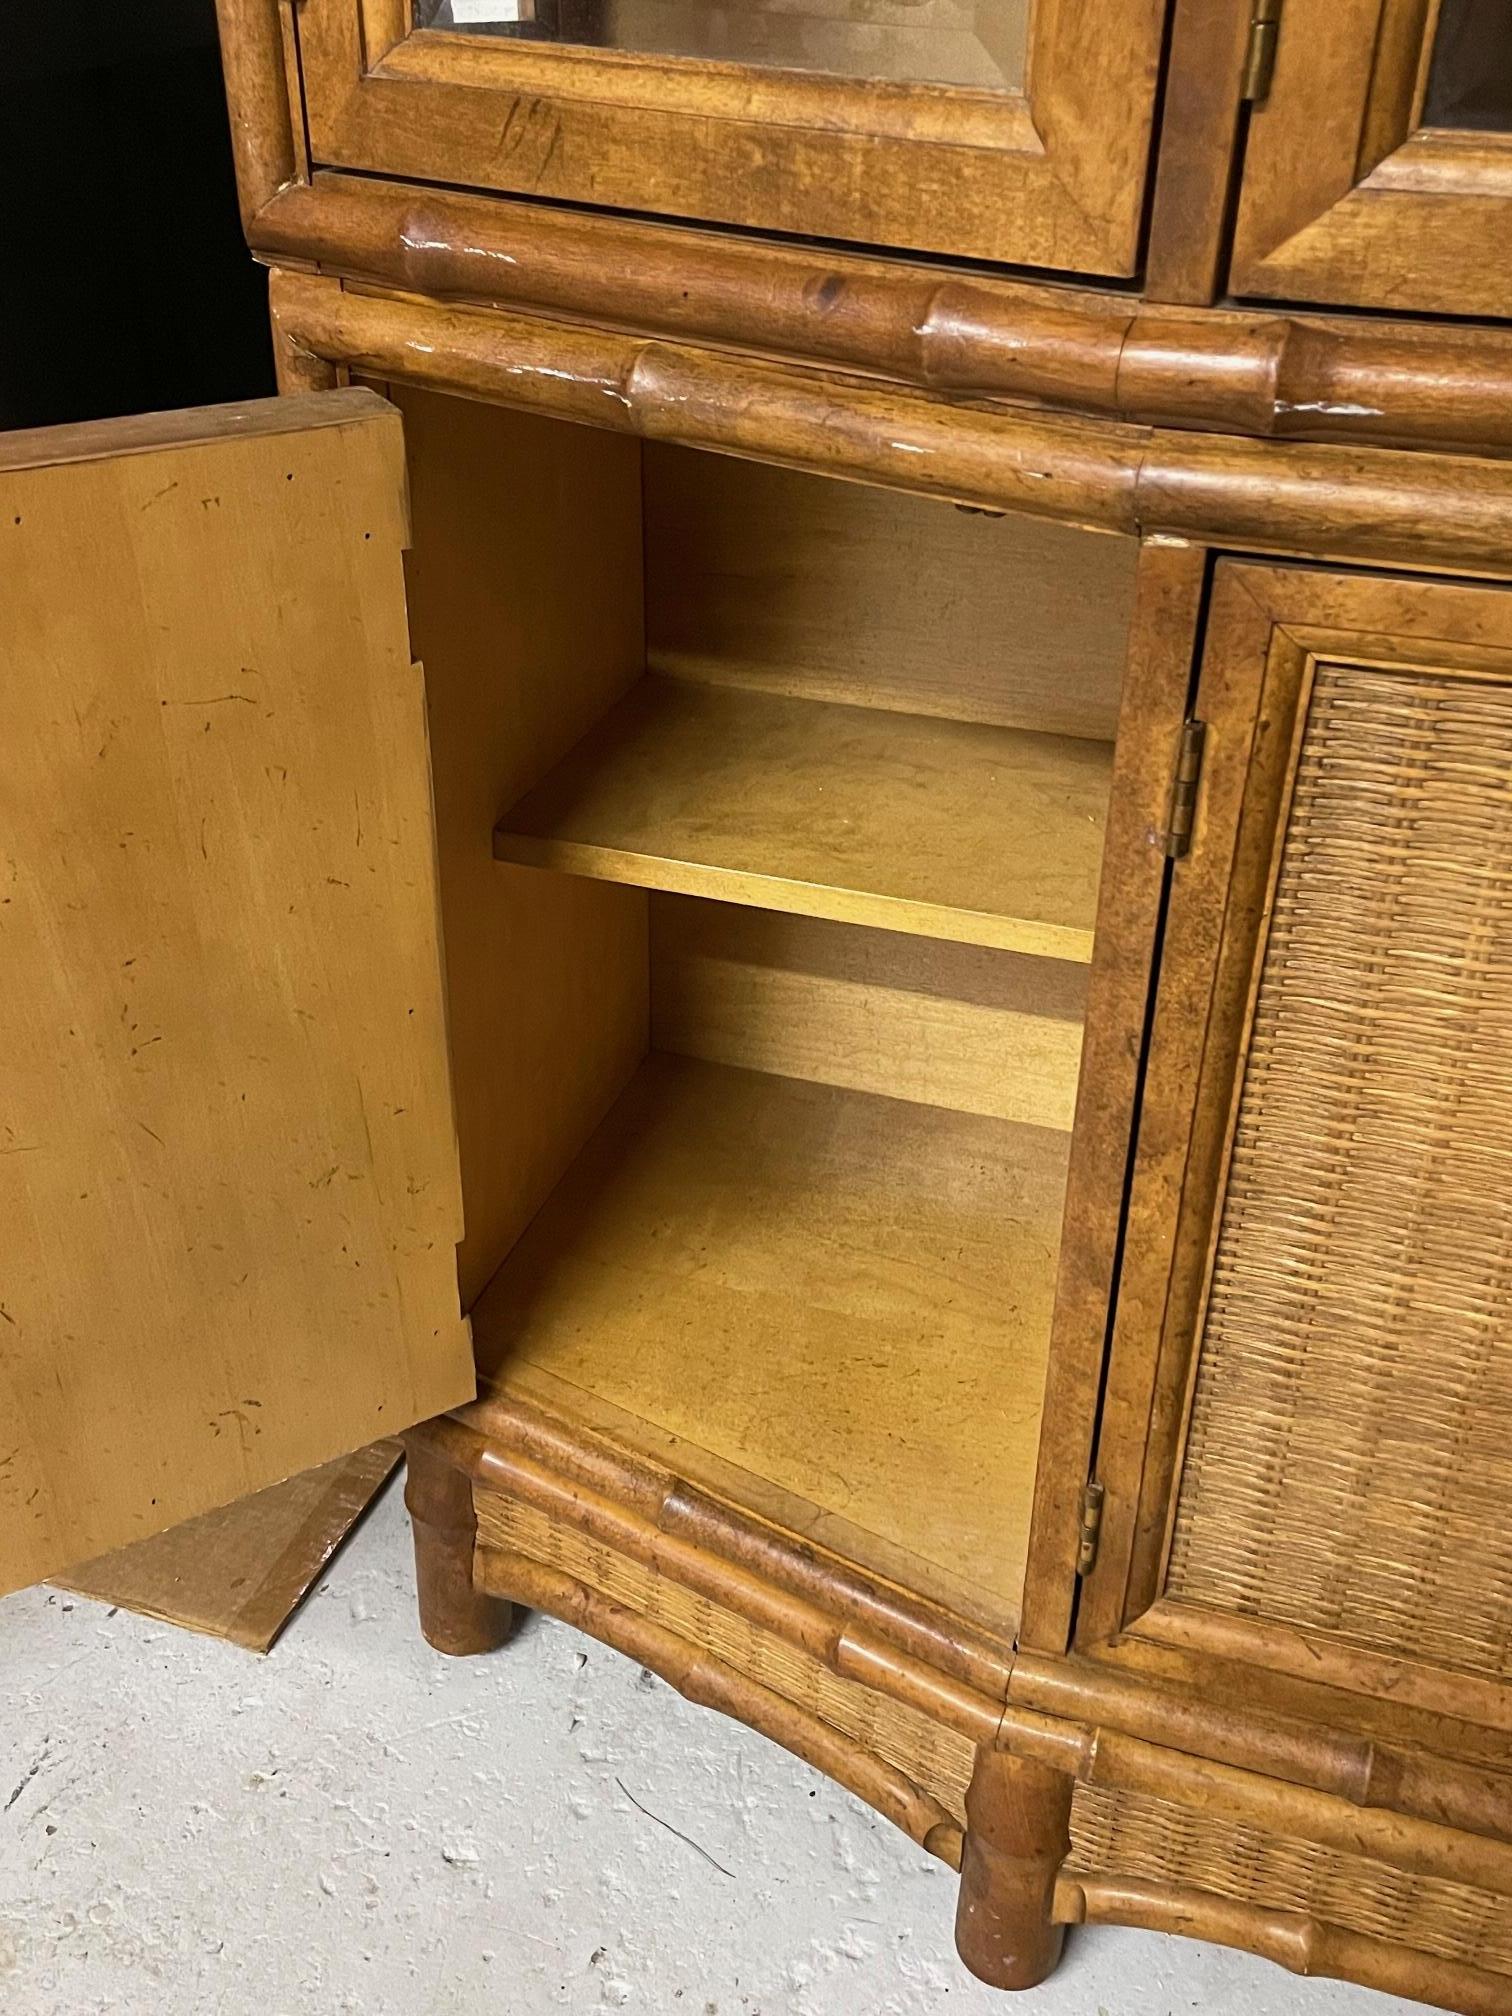 Vintage lighted china cabinet by American of Martinsville features faux bamboo detailing and wicker detailing. Four doors open to glass shelving, with storage below along with a flatware drawer. Good condition with minor imperfections consistent